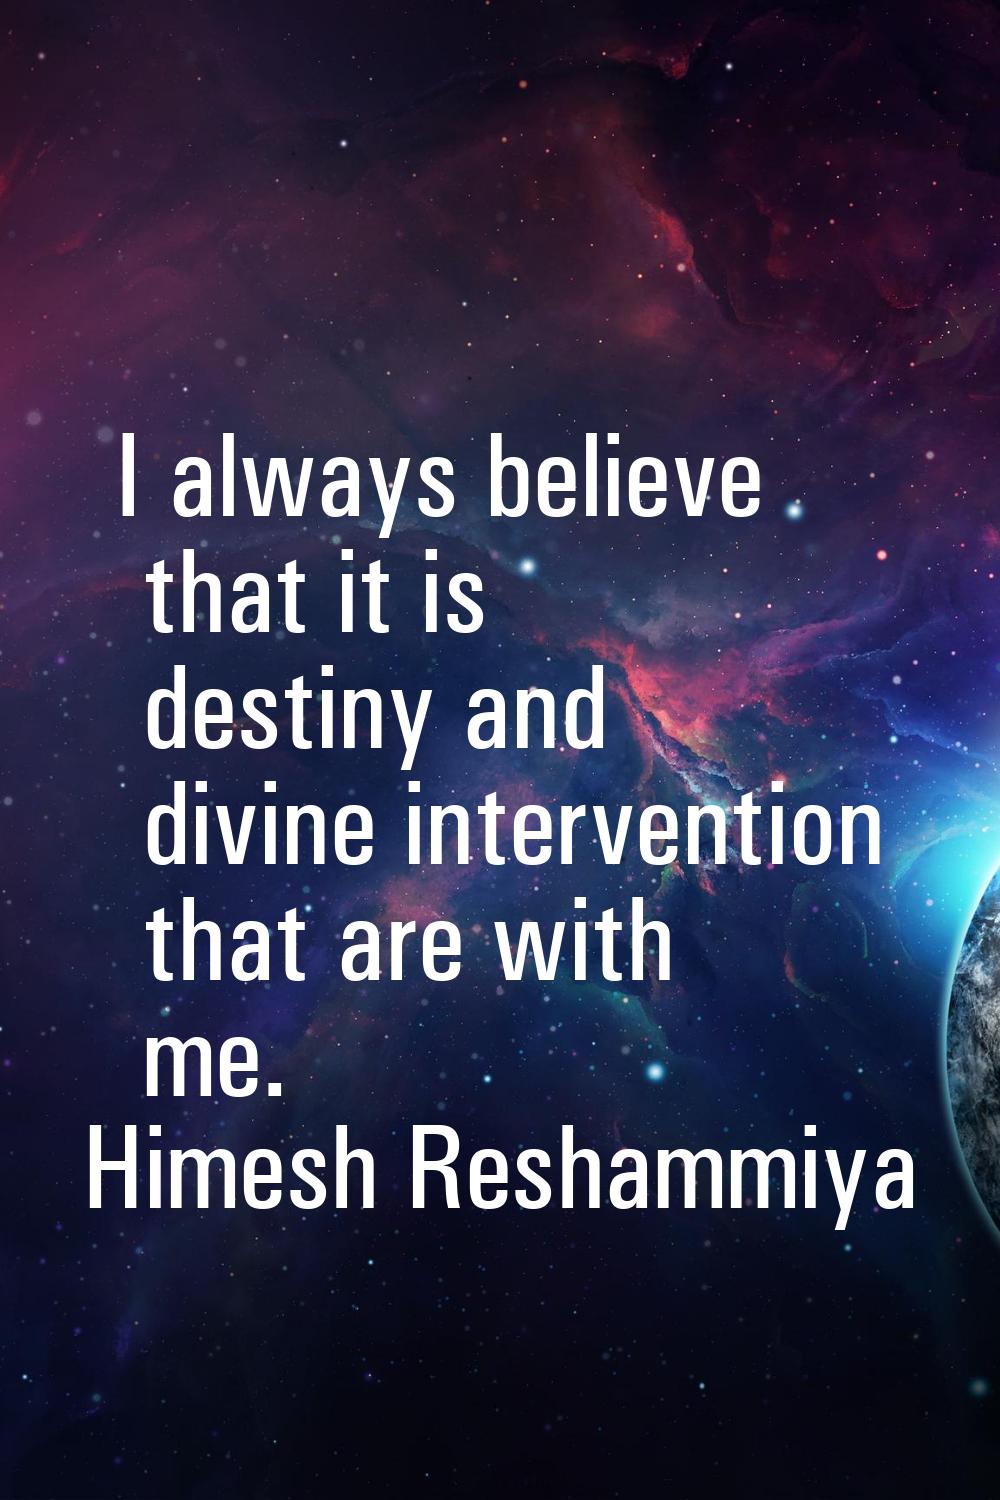 I always believe that it is destiny and divine intervention that are with me.